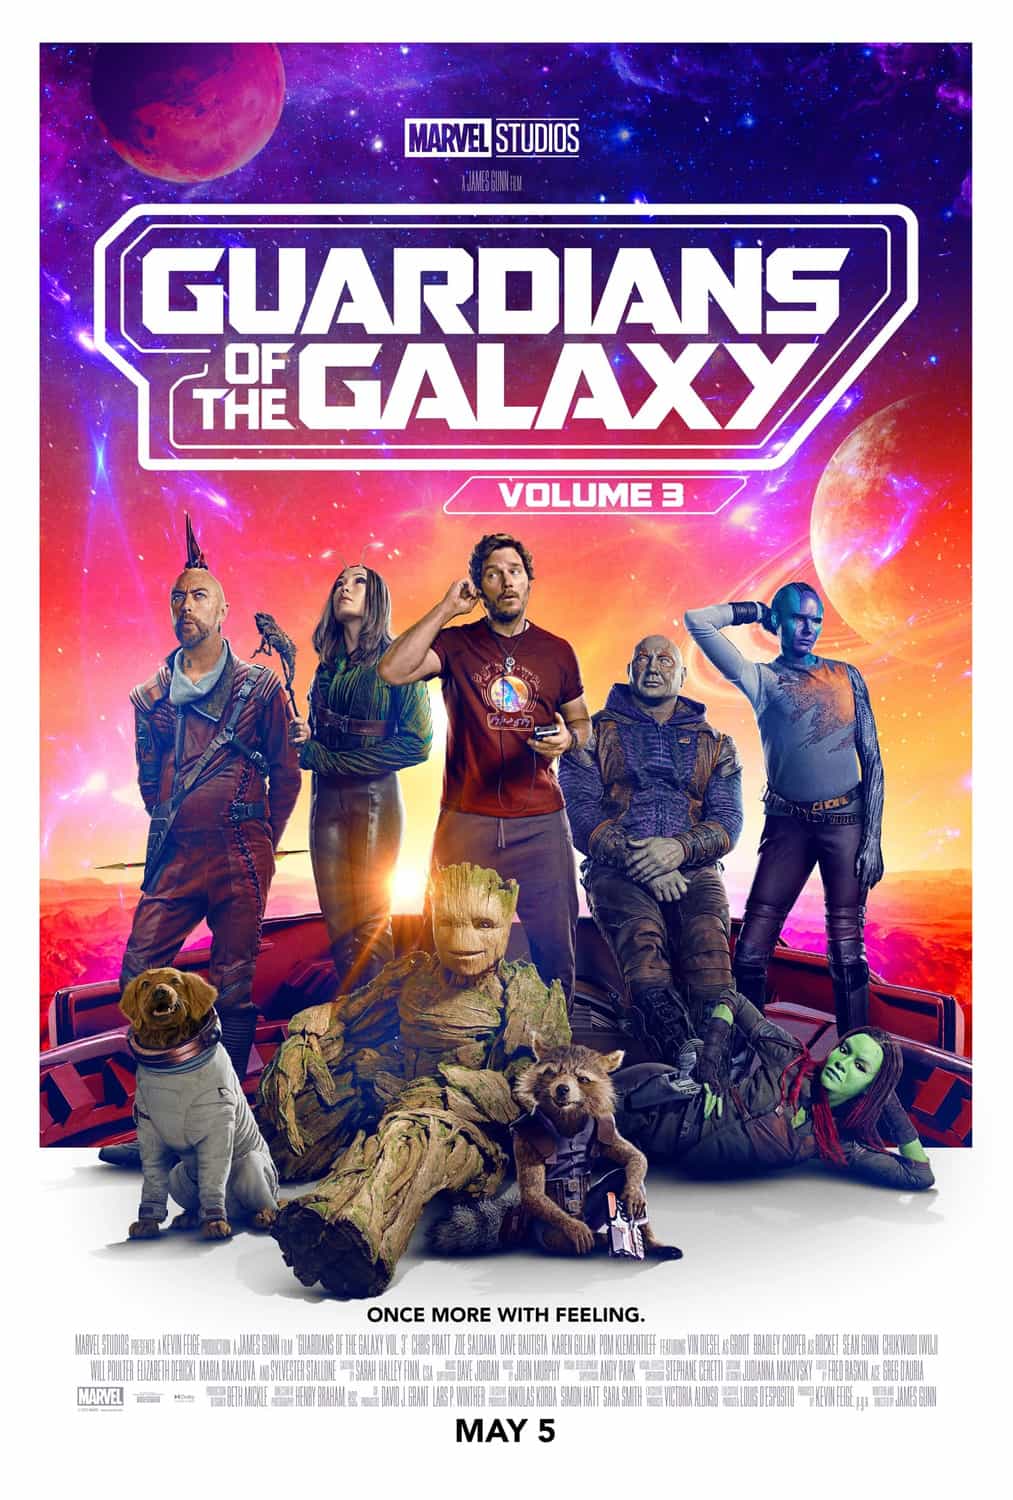 A new trailer and poster released for Guardians of the Galaxy Vol 3 starring Chris Pratt - movie UK release date 5th May 2023 #guardiansofthegalaxyvol3